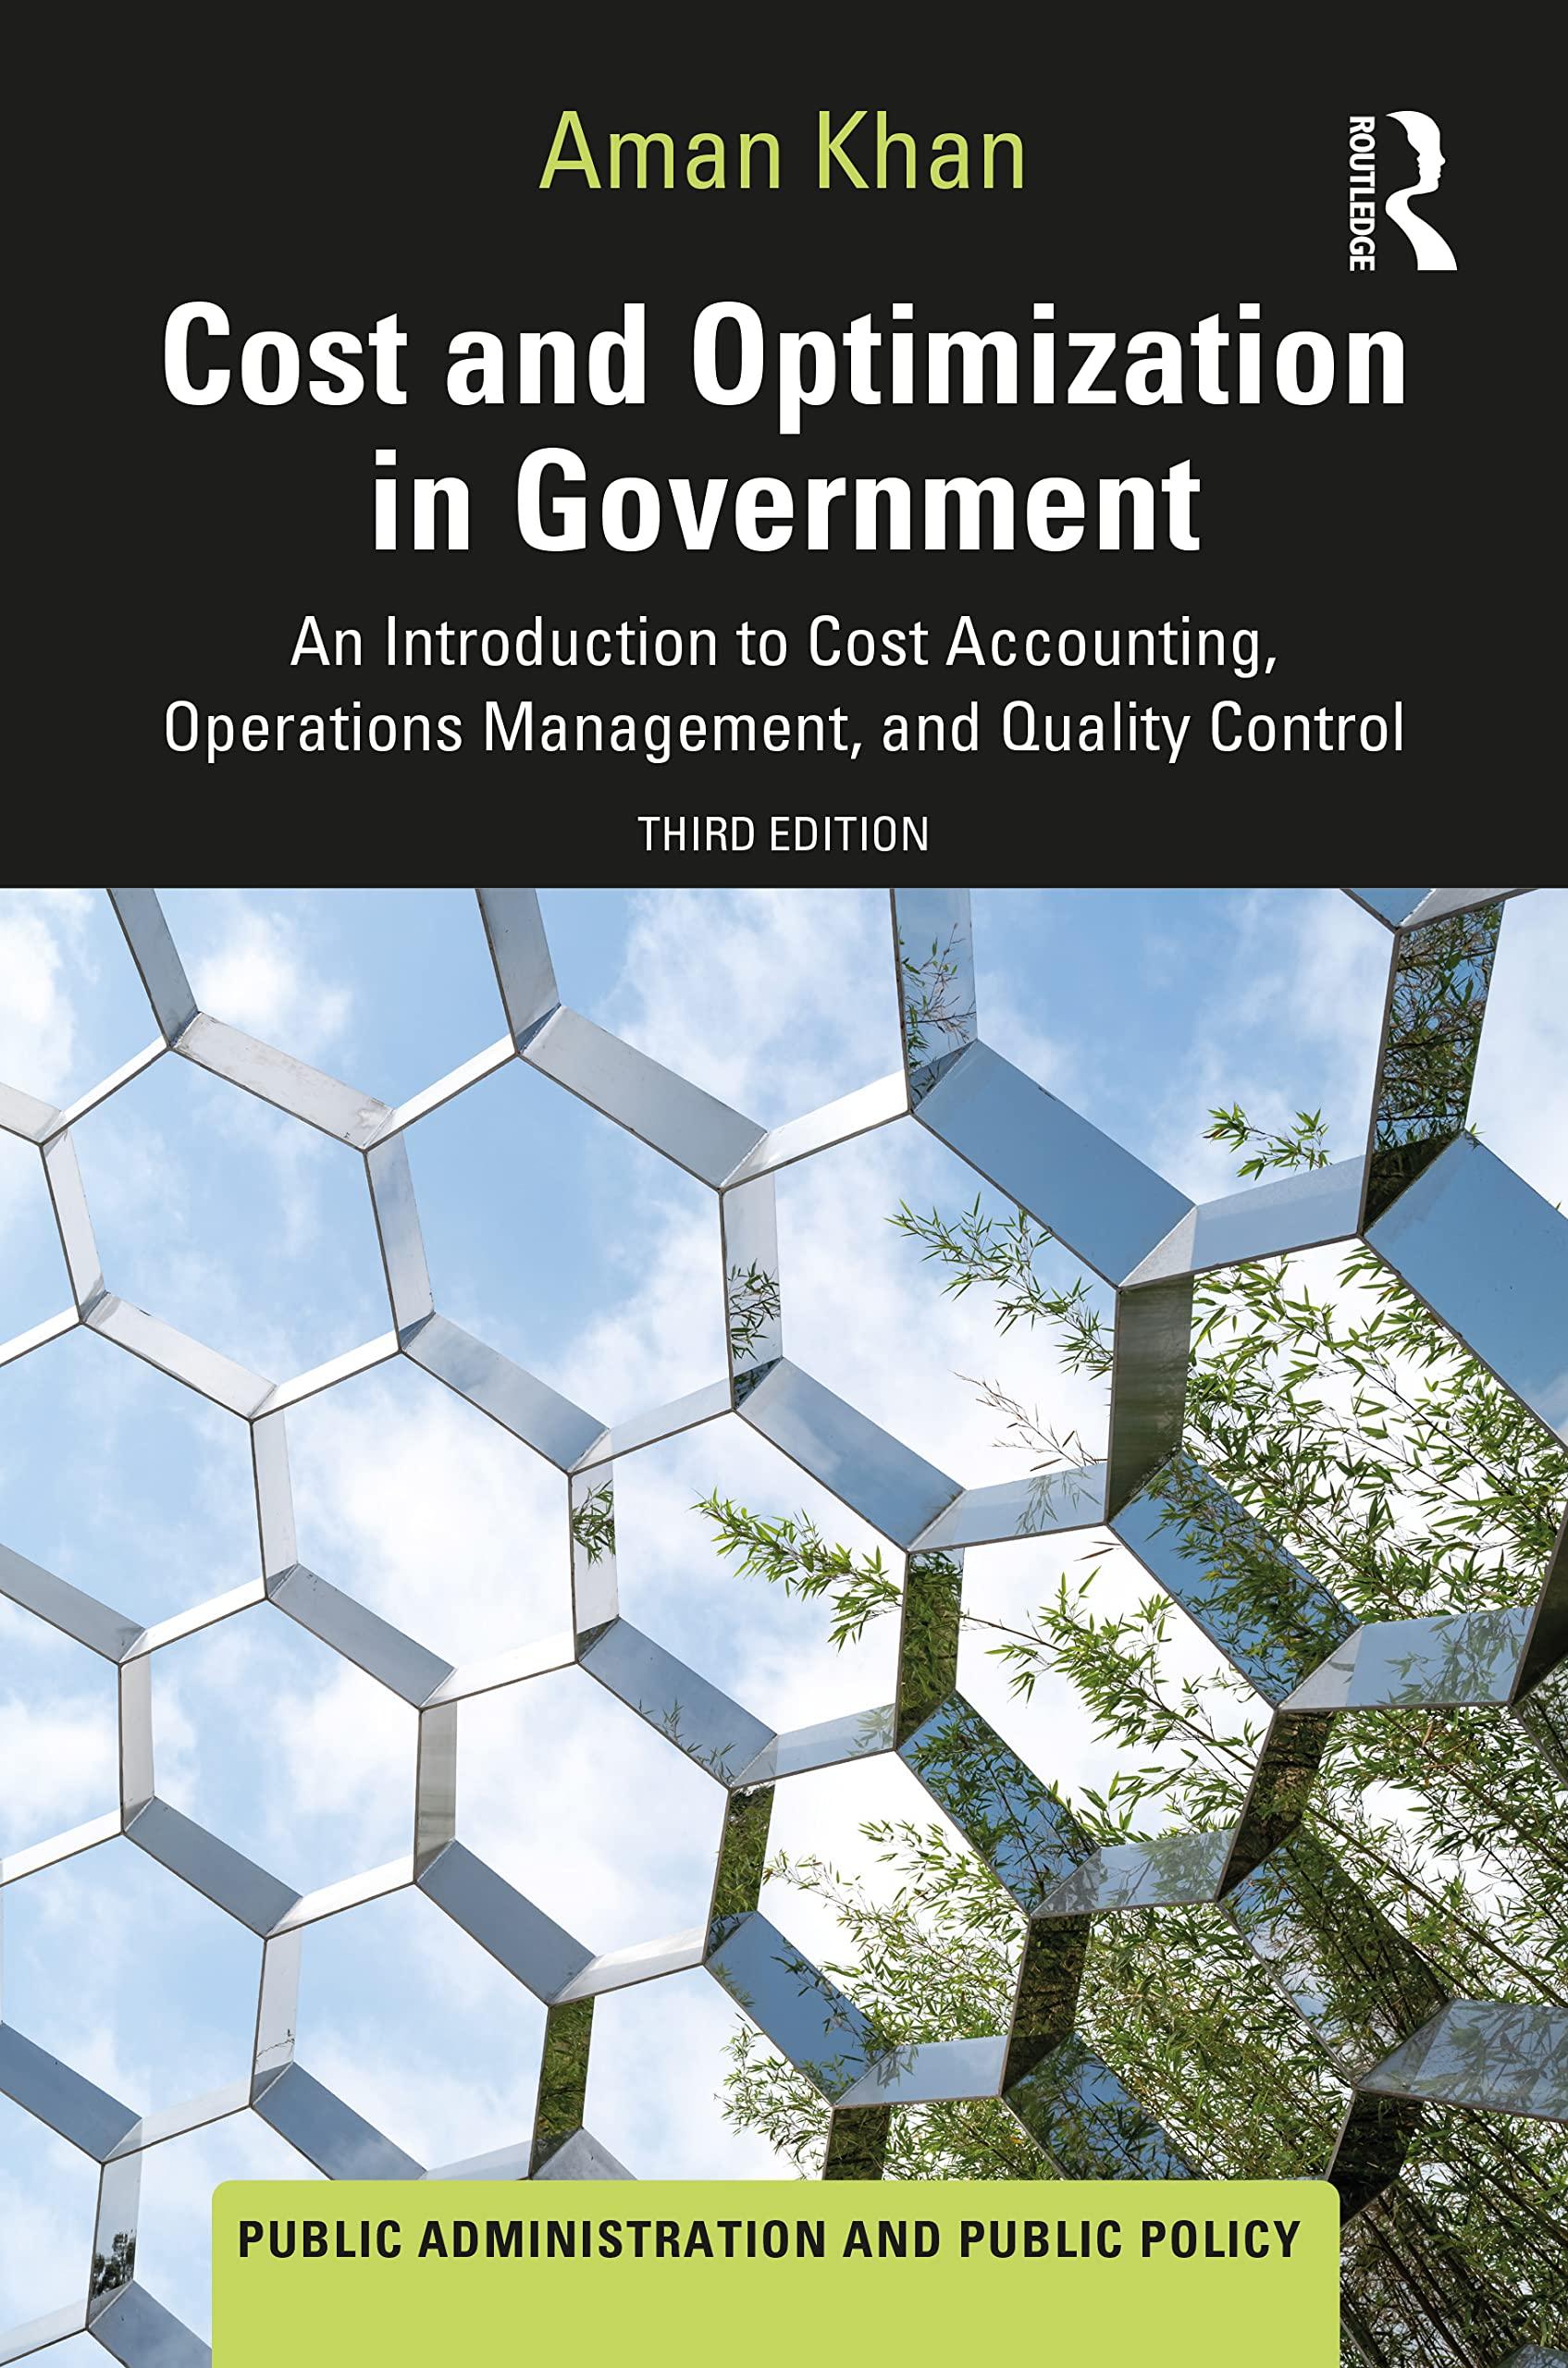 cost and optimization in government 3rd edition aman khan 103220687x, 978-1032206875